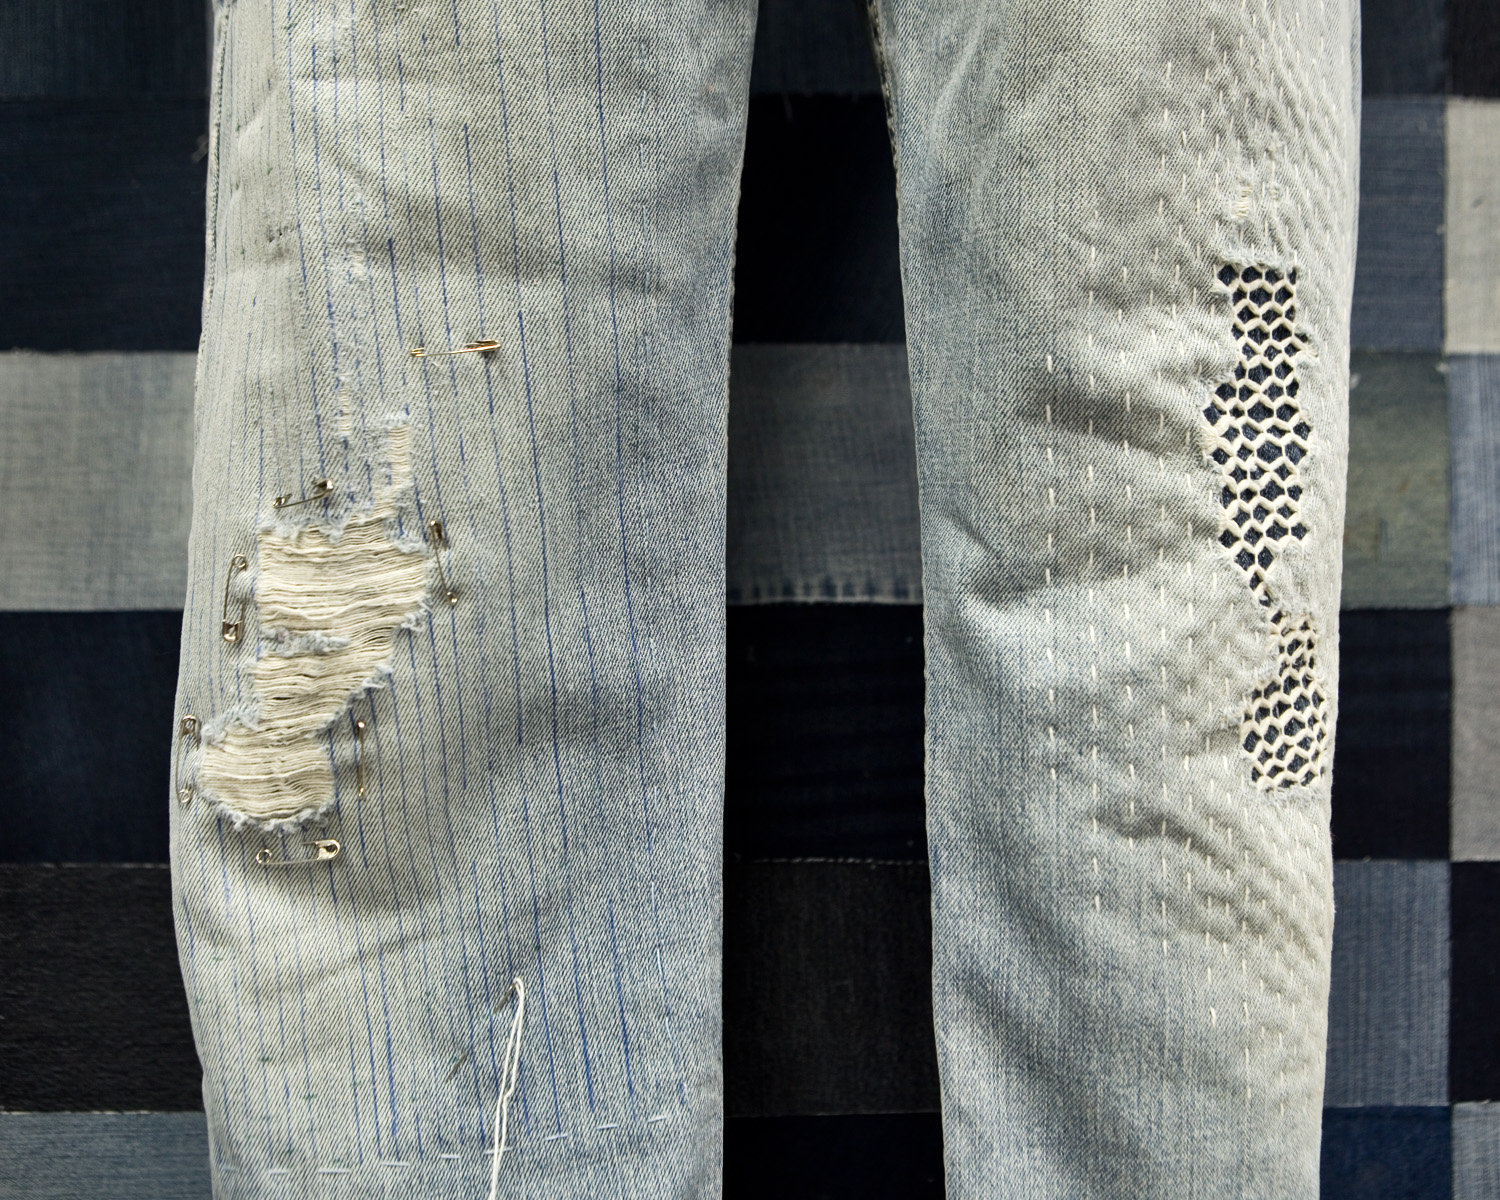 It takes about 2,000 gallons of water to produce one pair of jeans. RETHINK offers Visible Mending classes that will extend the life of a well-loved pair of jeans. Honor the most used part of your jeans (shown at left). Learn to use a running stitch over and over again, and graft the stitches together with visible mending techniques (shown at right). (Photo by Margie O’Loughlin)